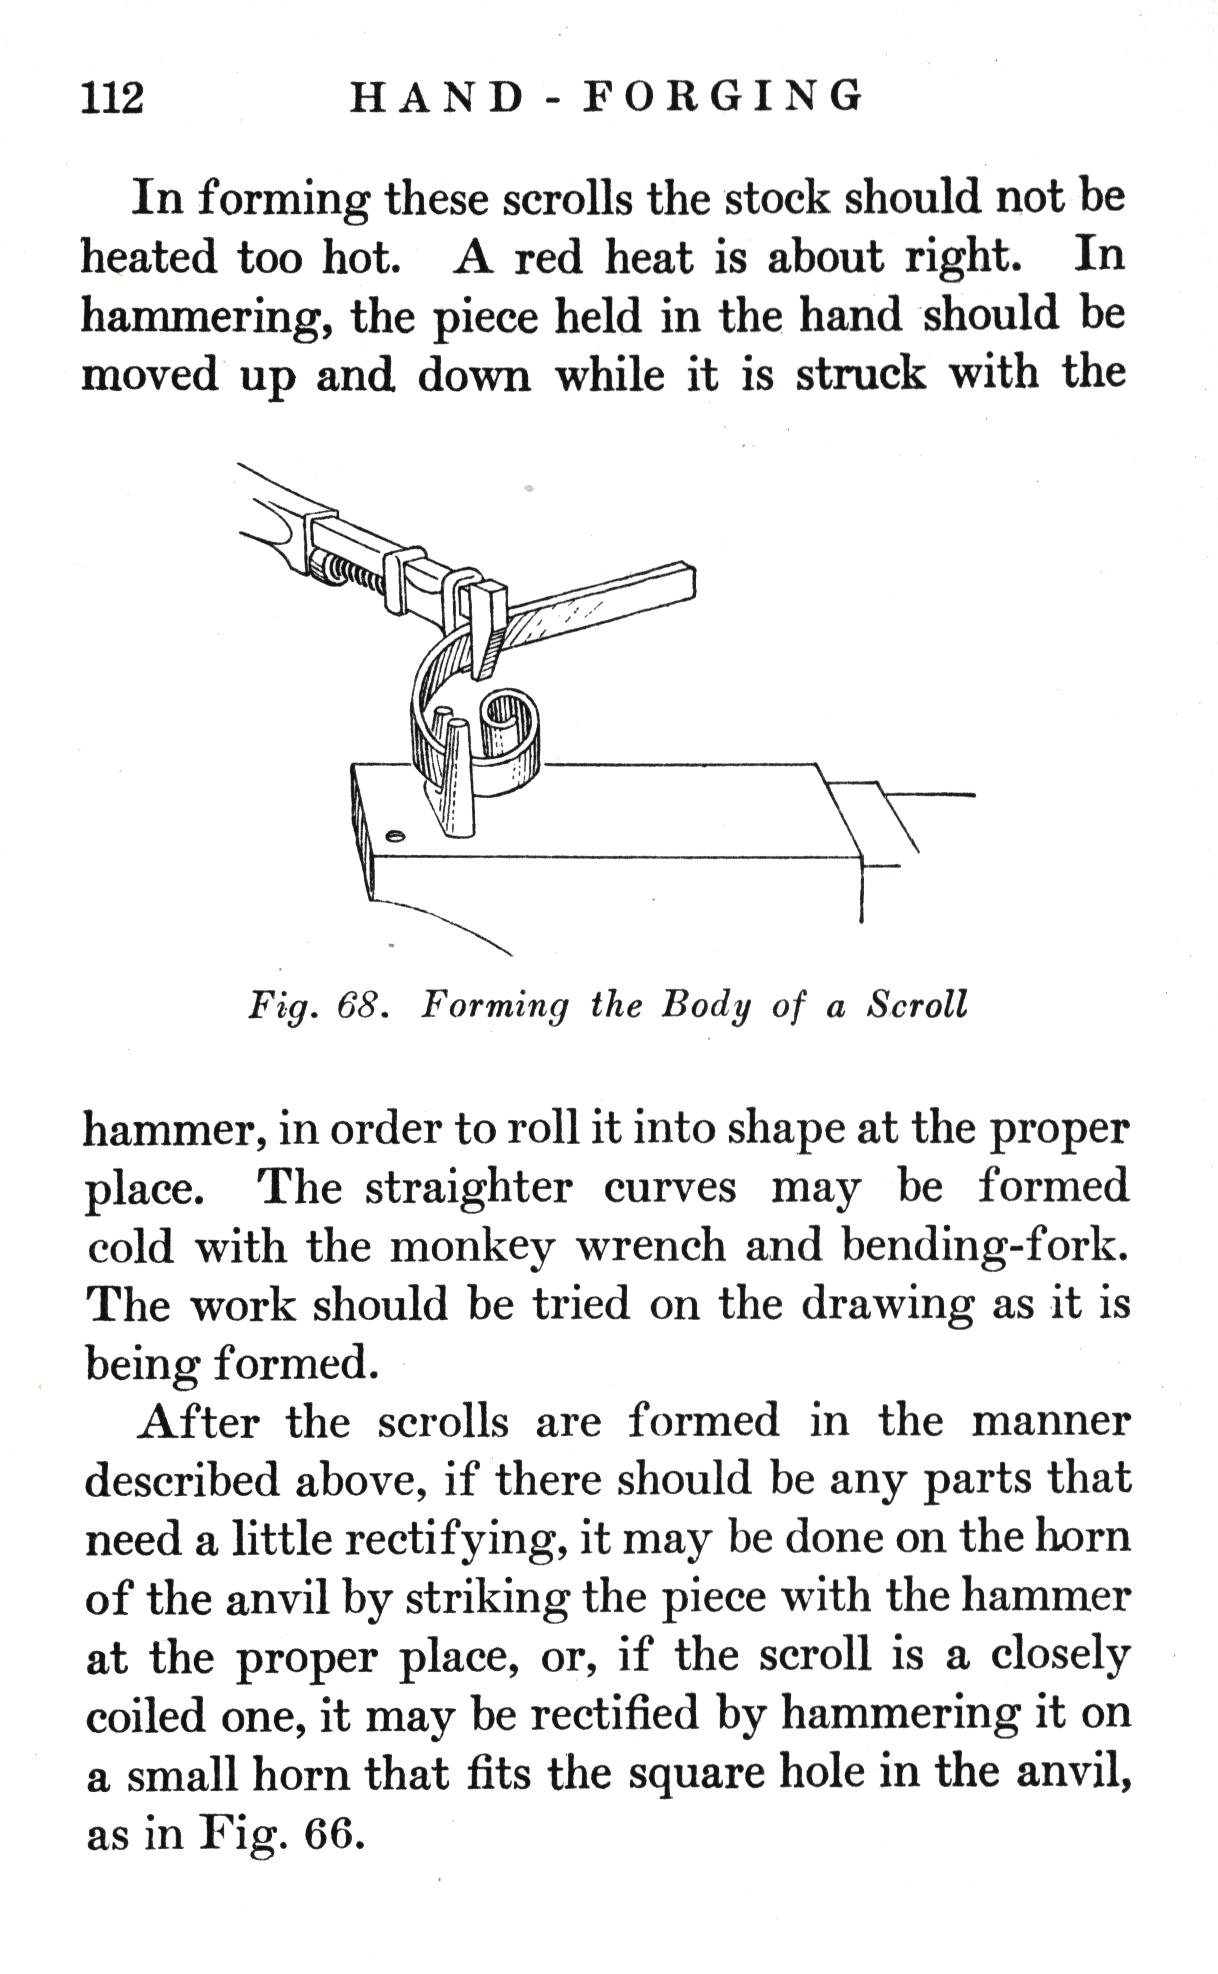 p.112	HAND-FORGING

In forming these scrolls the stock should not be heated too hot. A red heat is about right. In hammering, the piece held in the hand should be moved up and down while it is struck with the

Fig. 68.   Forming the Body of a Scroll

hammer, in order to roll it into shape at the proper place. The straighter curves may be formed cold with the monkey wrench and bending-fork. The work should be tried on the drawing as it is being formed.
After the scrolls are formed in the manner described above, if there should be any parts that need a little rectifying, it may be done on the horn of the anvil by striking the piece with the hammer at the proper place, or, if the scroll is a closely coiled one, it may be rectified by hammering it on a small horn that fits the square hole in the anvil, as in Fig. 66.